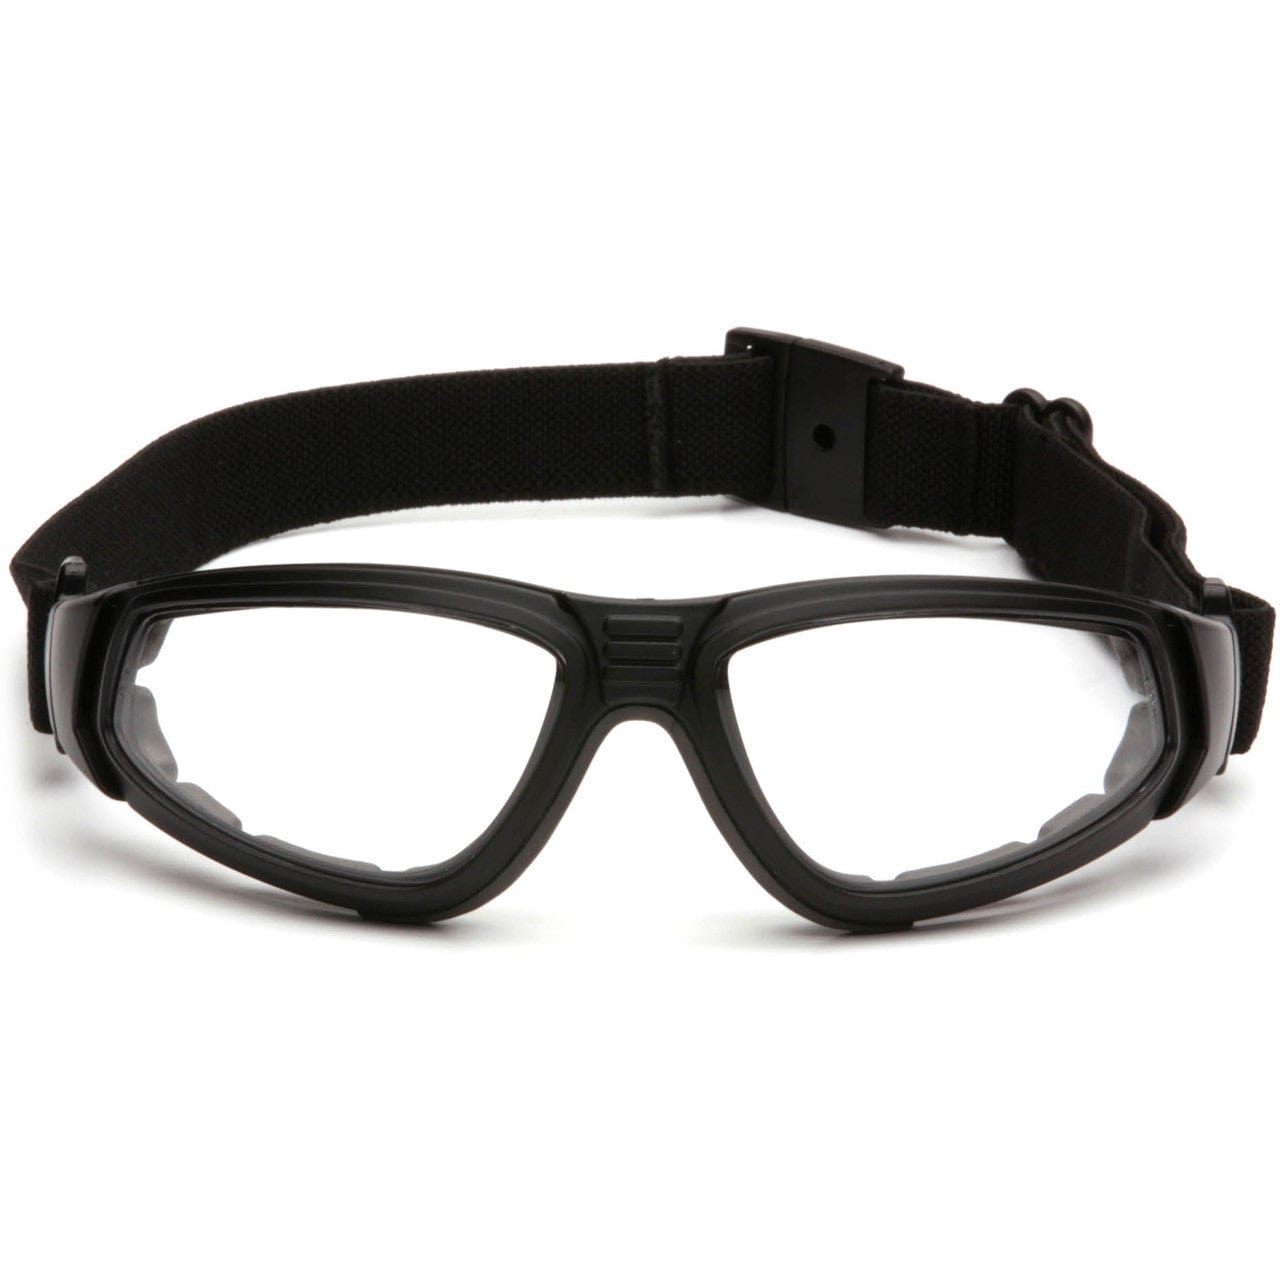 Pyramex XSG Goggle Black Frame Clear Anti-Fog Lens with Strap GB4010ST Front